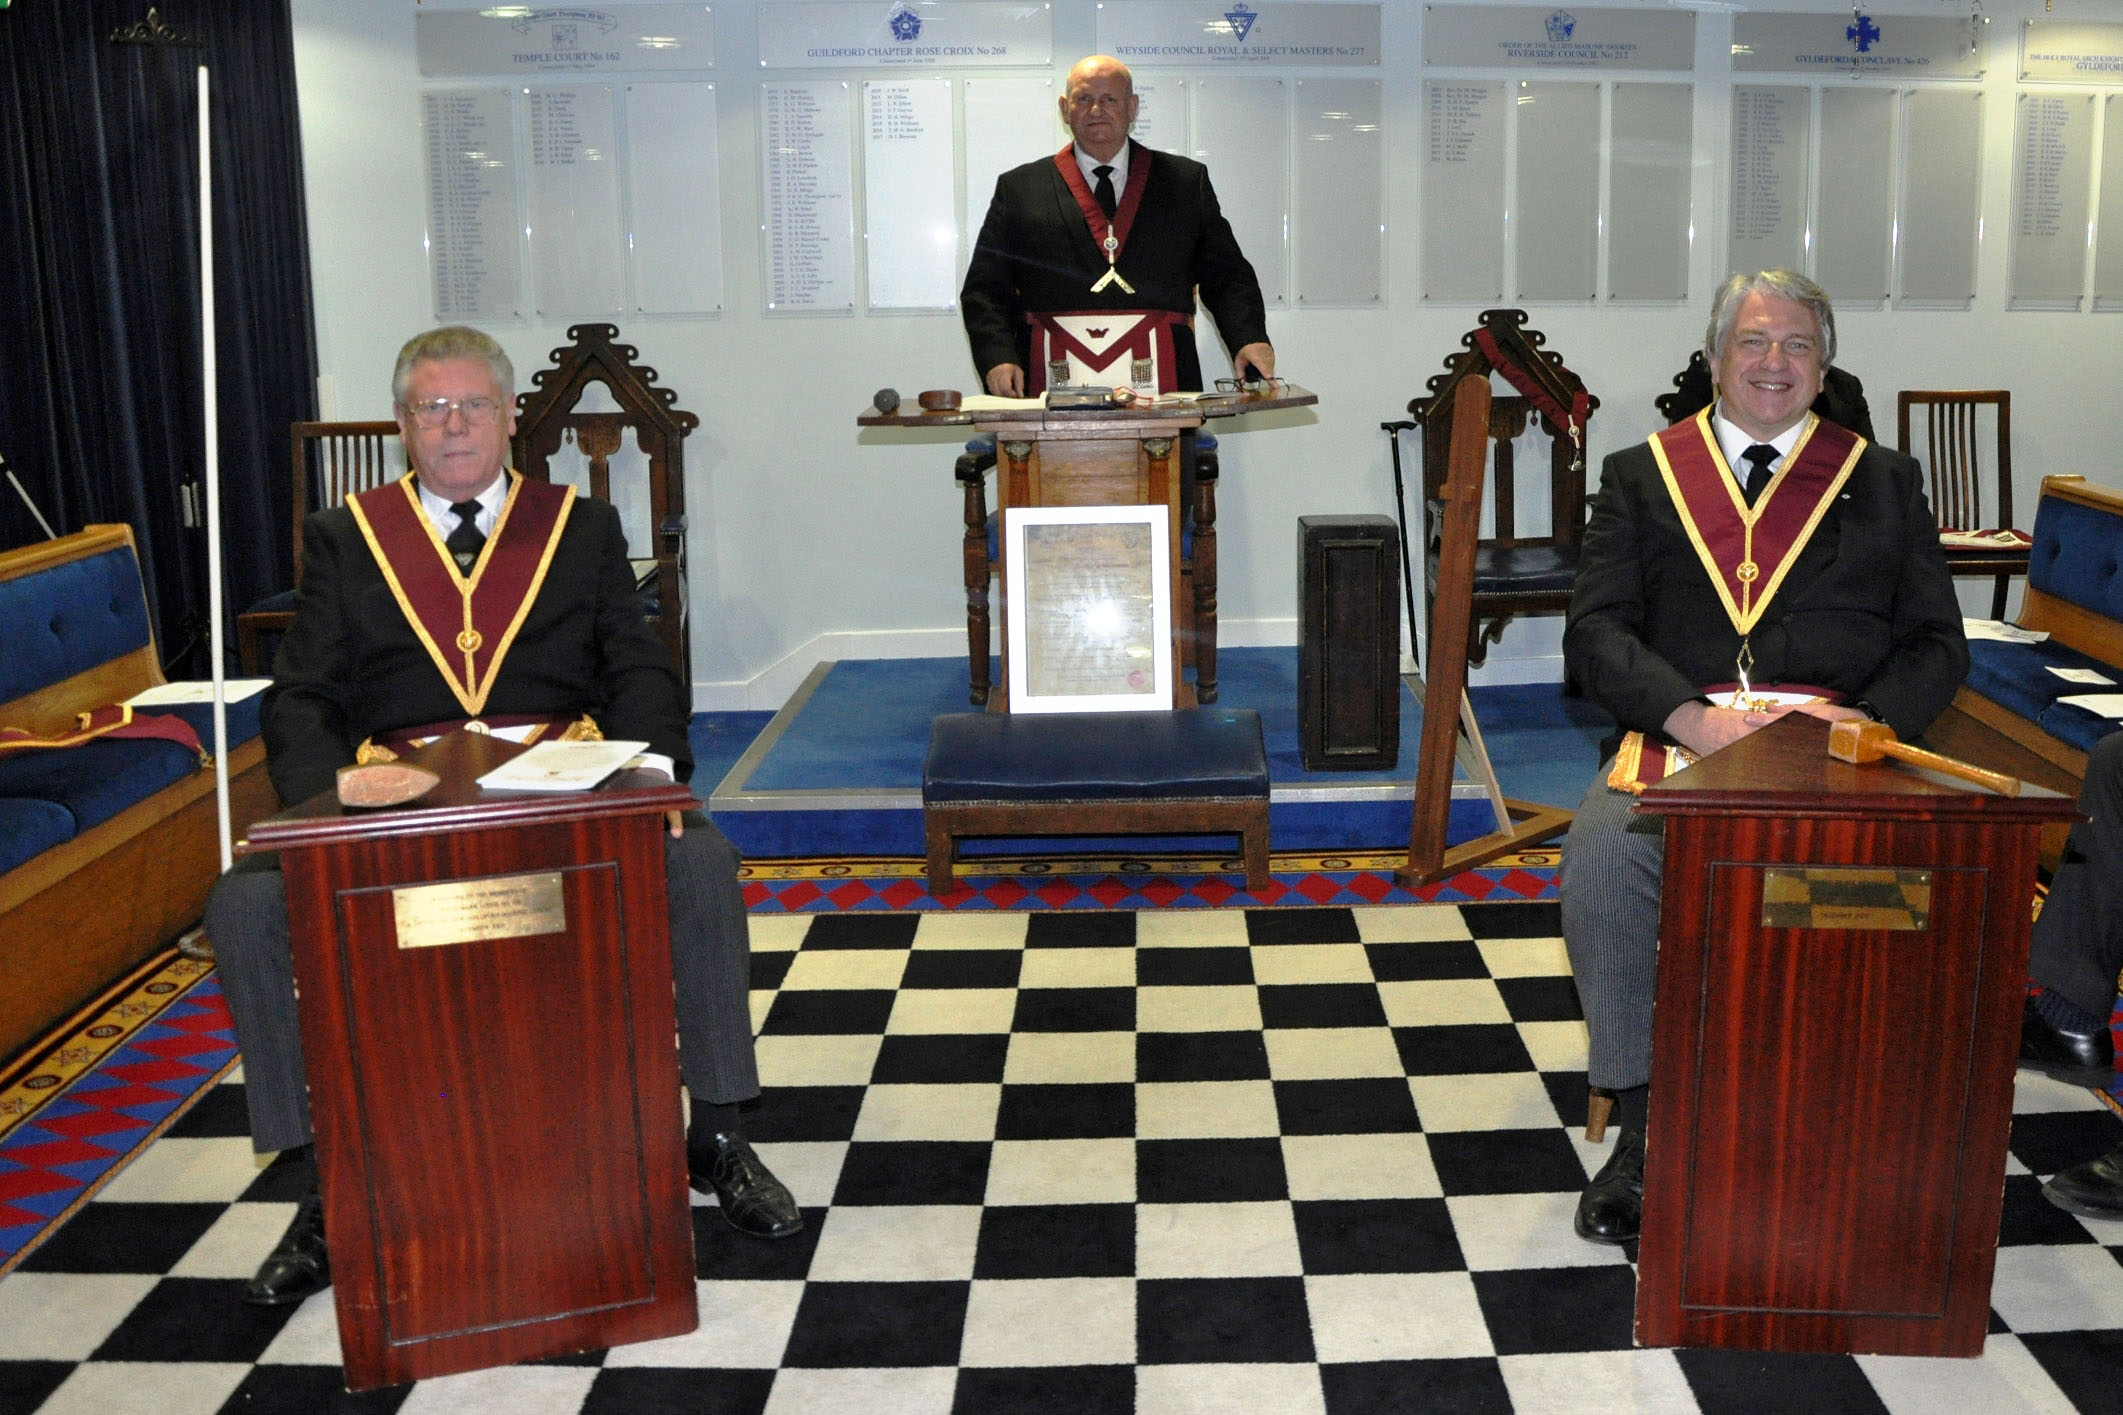 Executive Visit by the Provincial Grand Master to the Court of Harrow Way